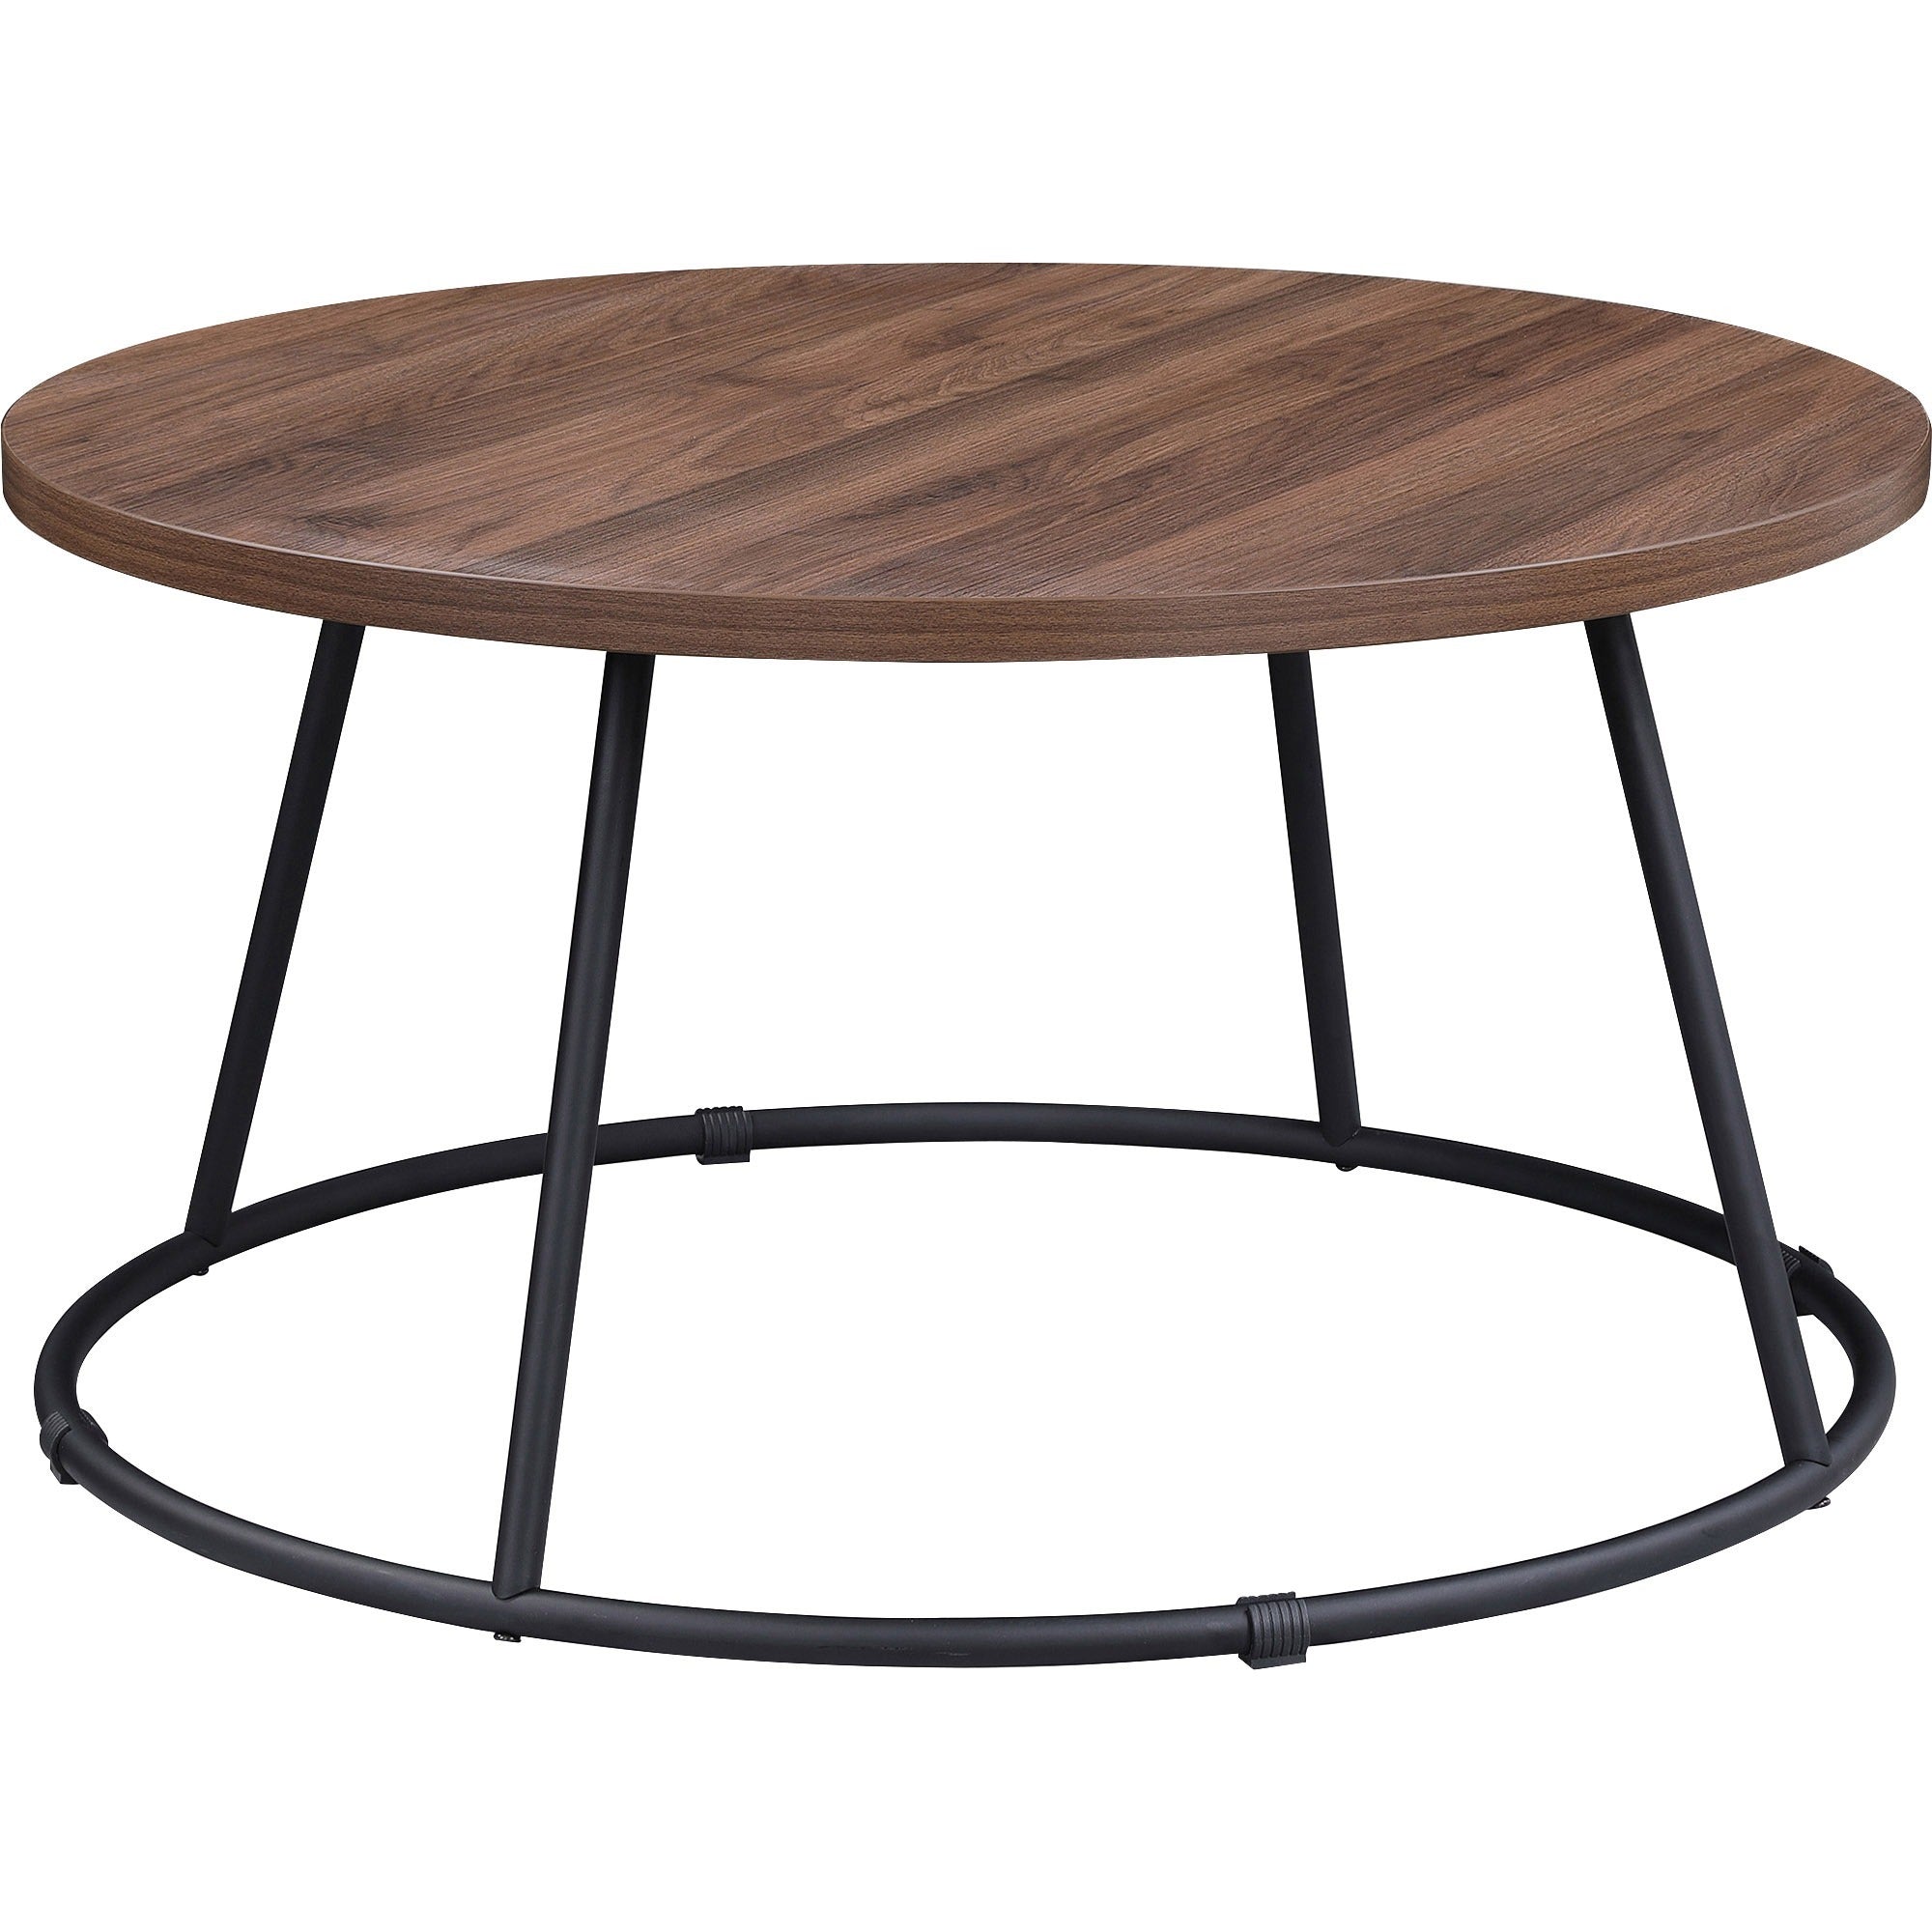 lorell-accession-coffee-table-for-table-topwalnut-round-top-powder-coated-four-leg-base-4-legs-200-lb-capacity-x-1-table-top-thickness-x-3150-table-top-diameter-1675-height-assembly-required-1-each_llr16259 - 1